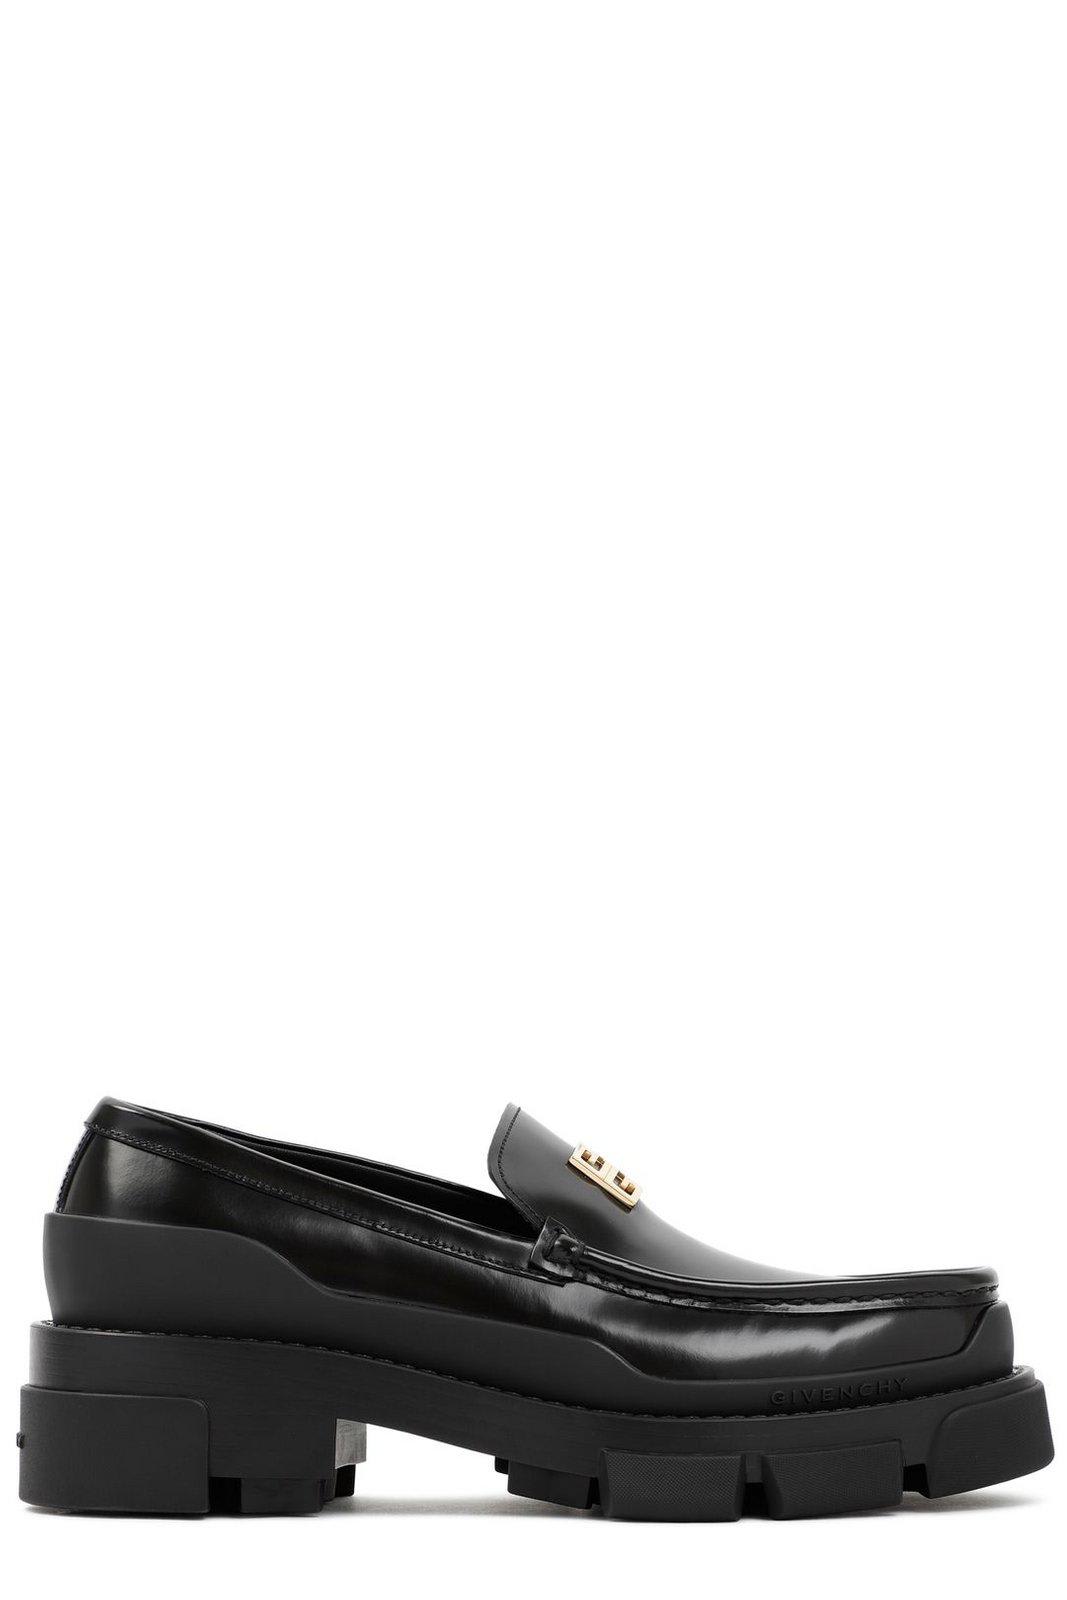 GIVENCHY TERRA SLIP-ON LOAFERS